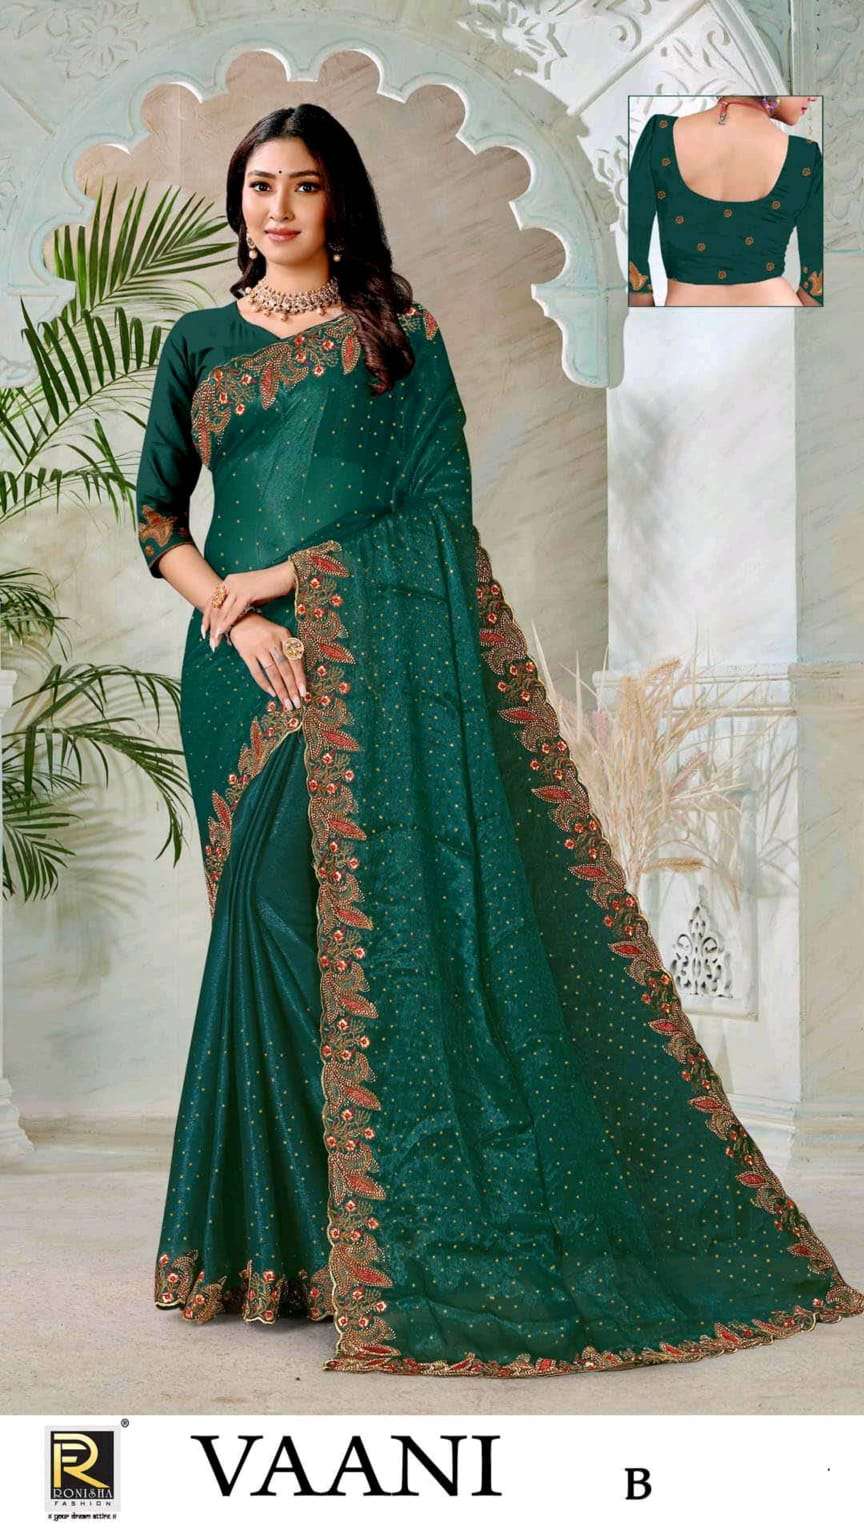 Vaani by ranjna saree embroidery worked jharkan diamond party wear saree collection 